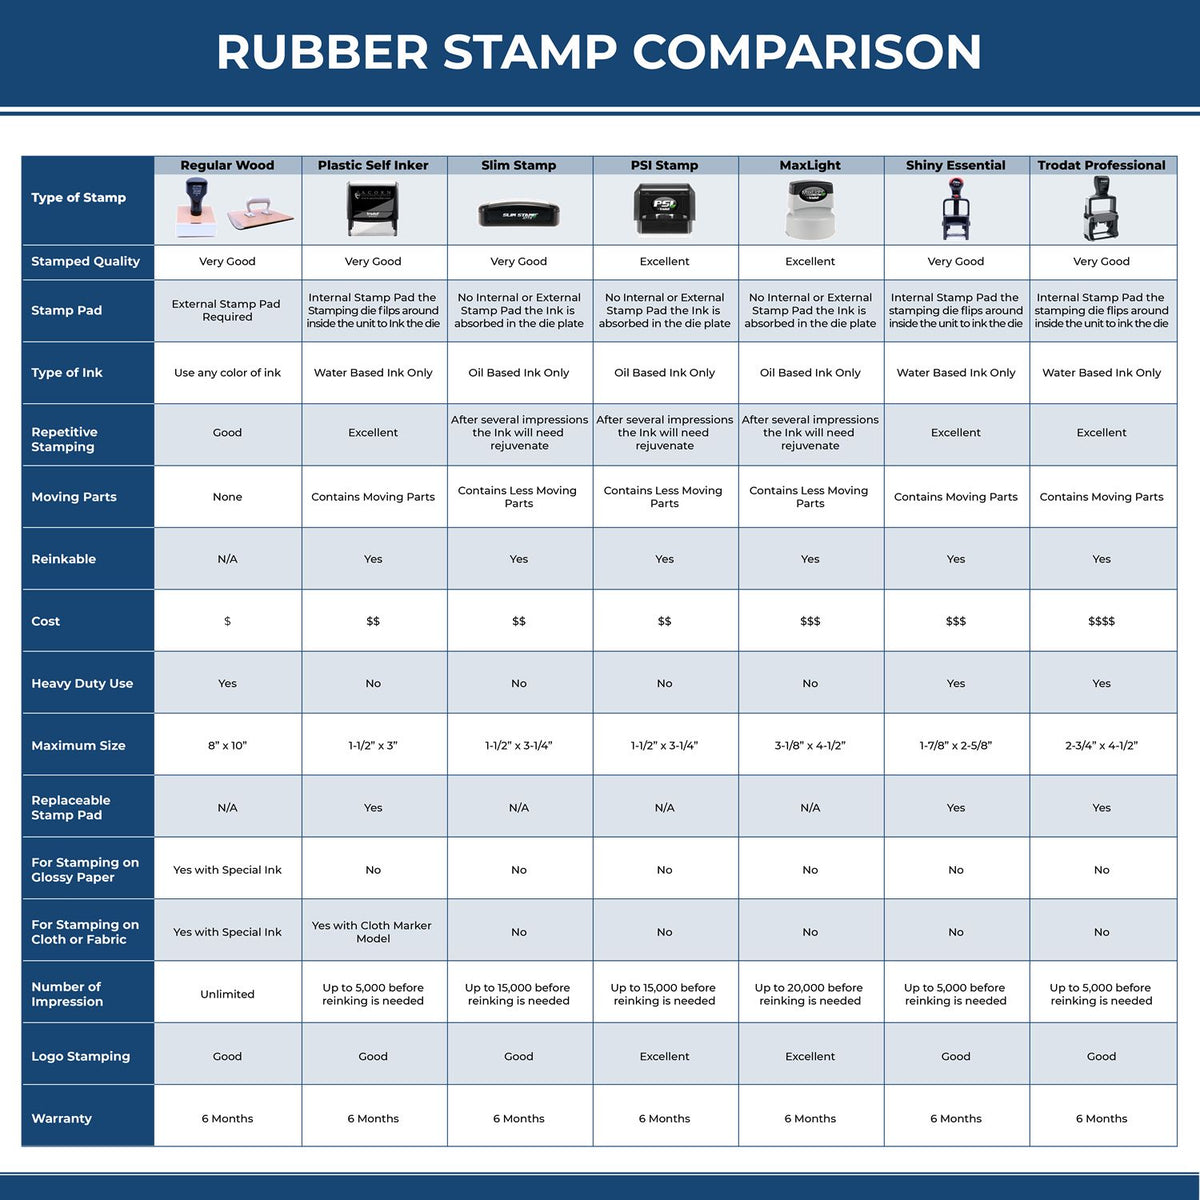 Large Self Inking Creditors Exhibit Stamp 4597S Rubber Stamp Comparison